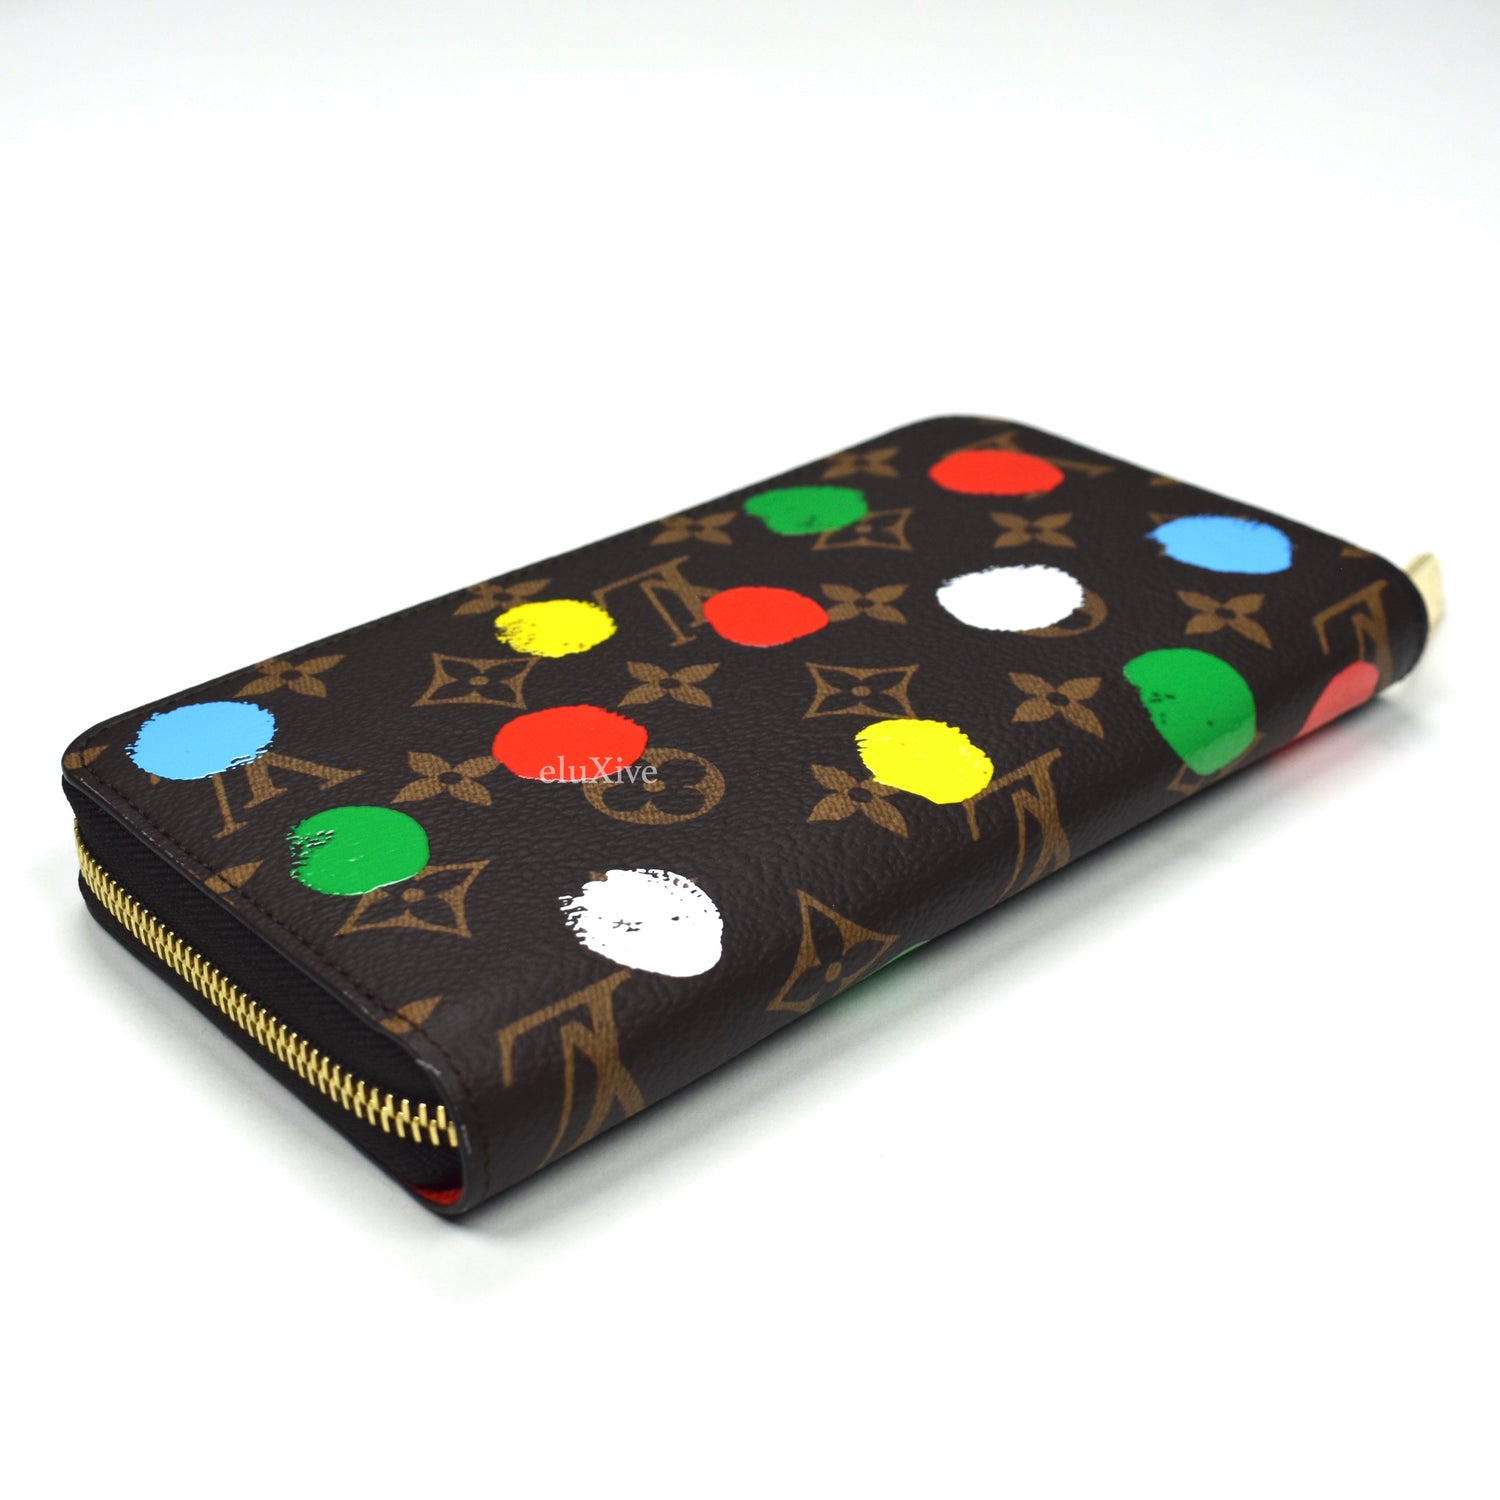 Louis Vuitton Clemence Wallet Limited Edition Blooming Flowers